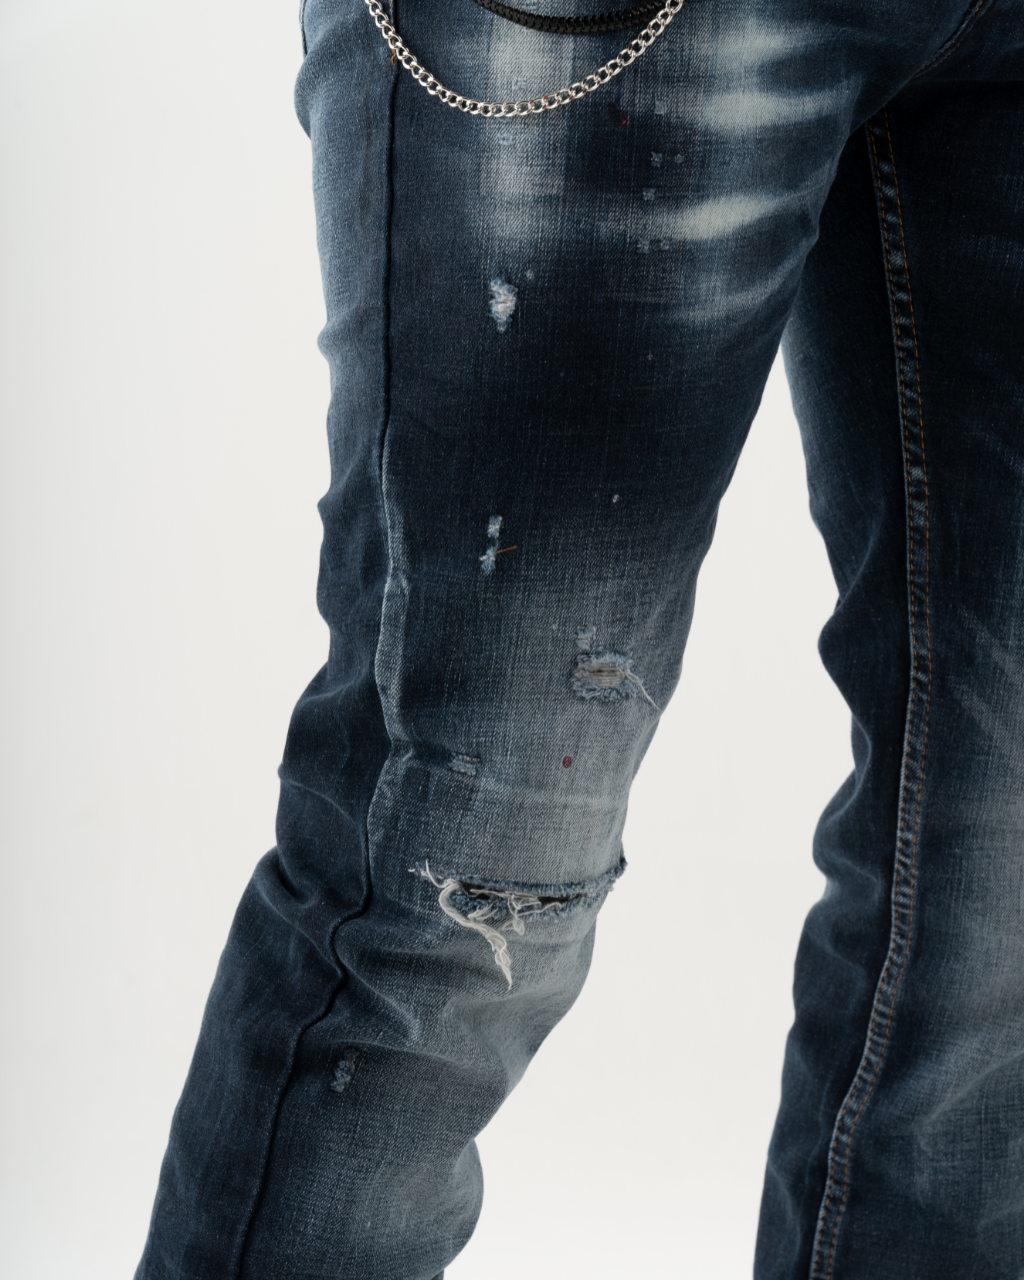 A man sporting LIGHTNING jeans with chains, creating a fashionable look for mens streetwear.